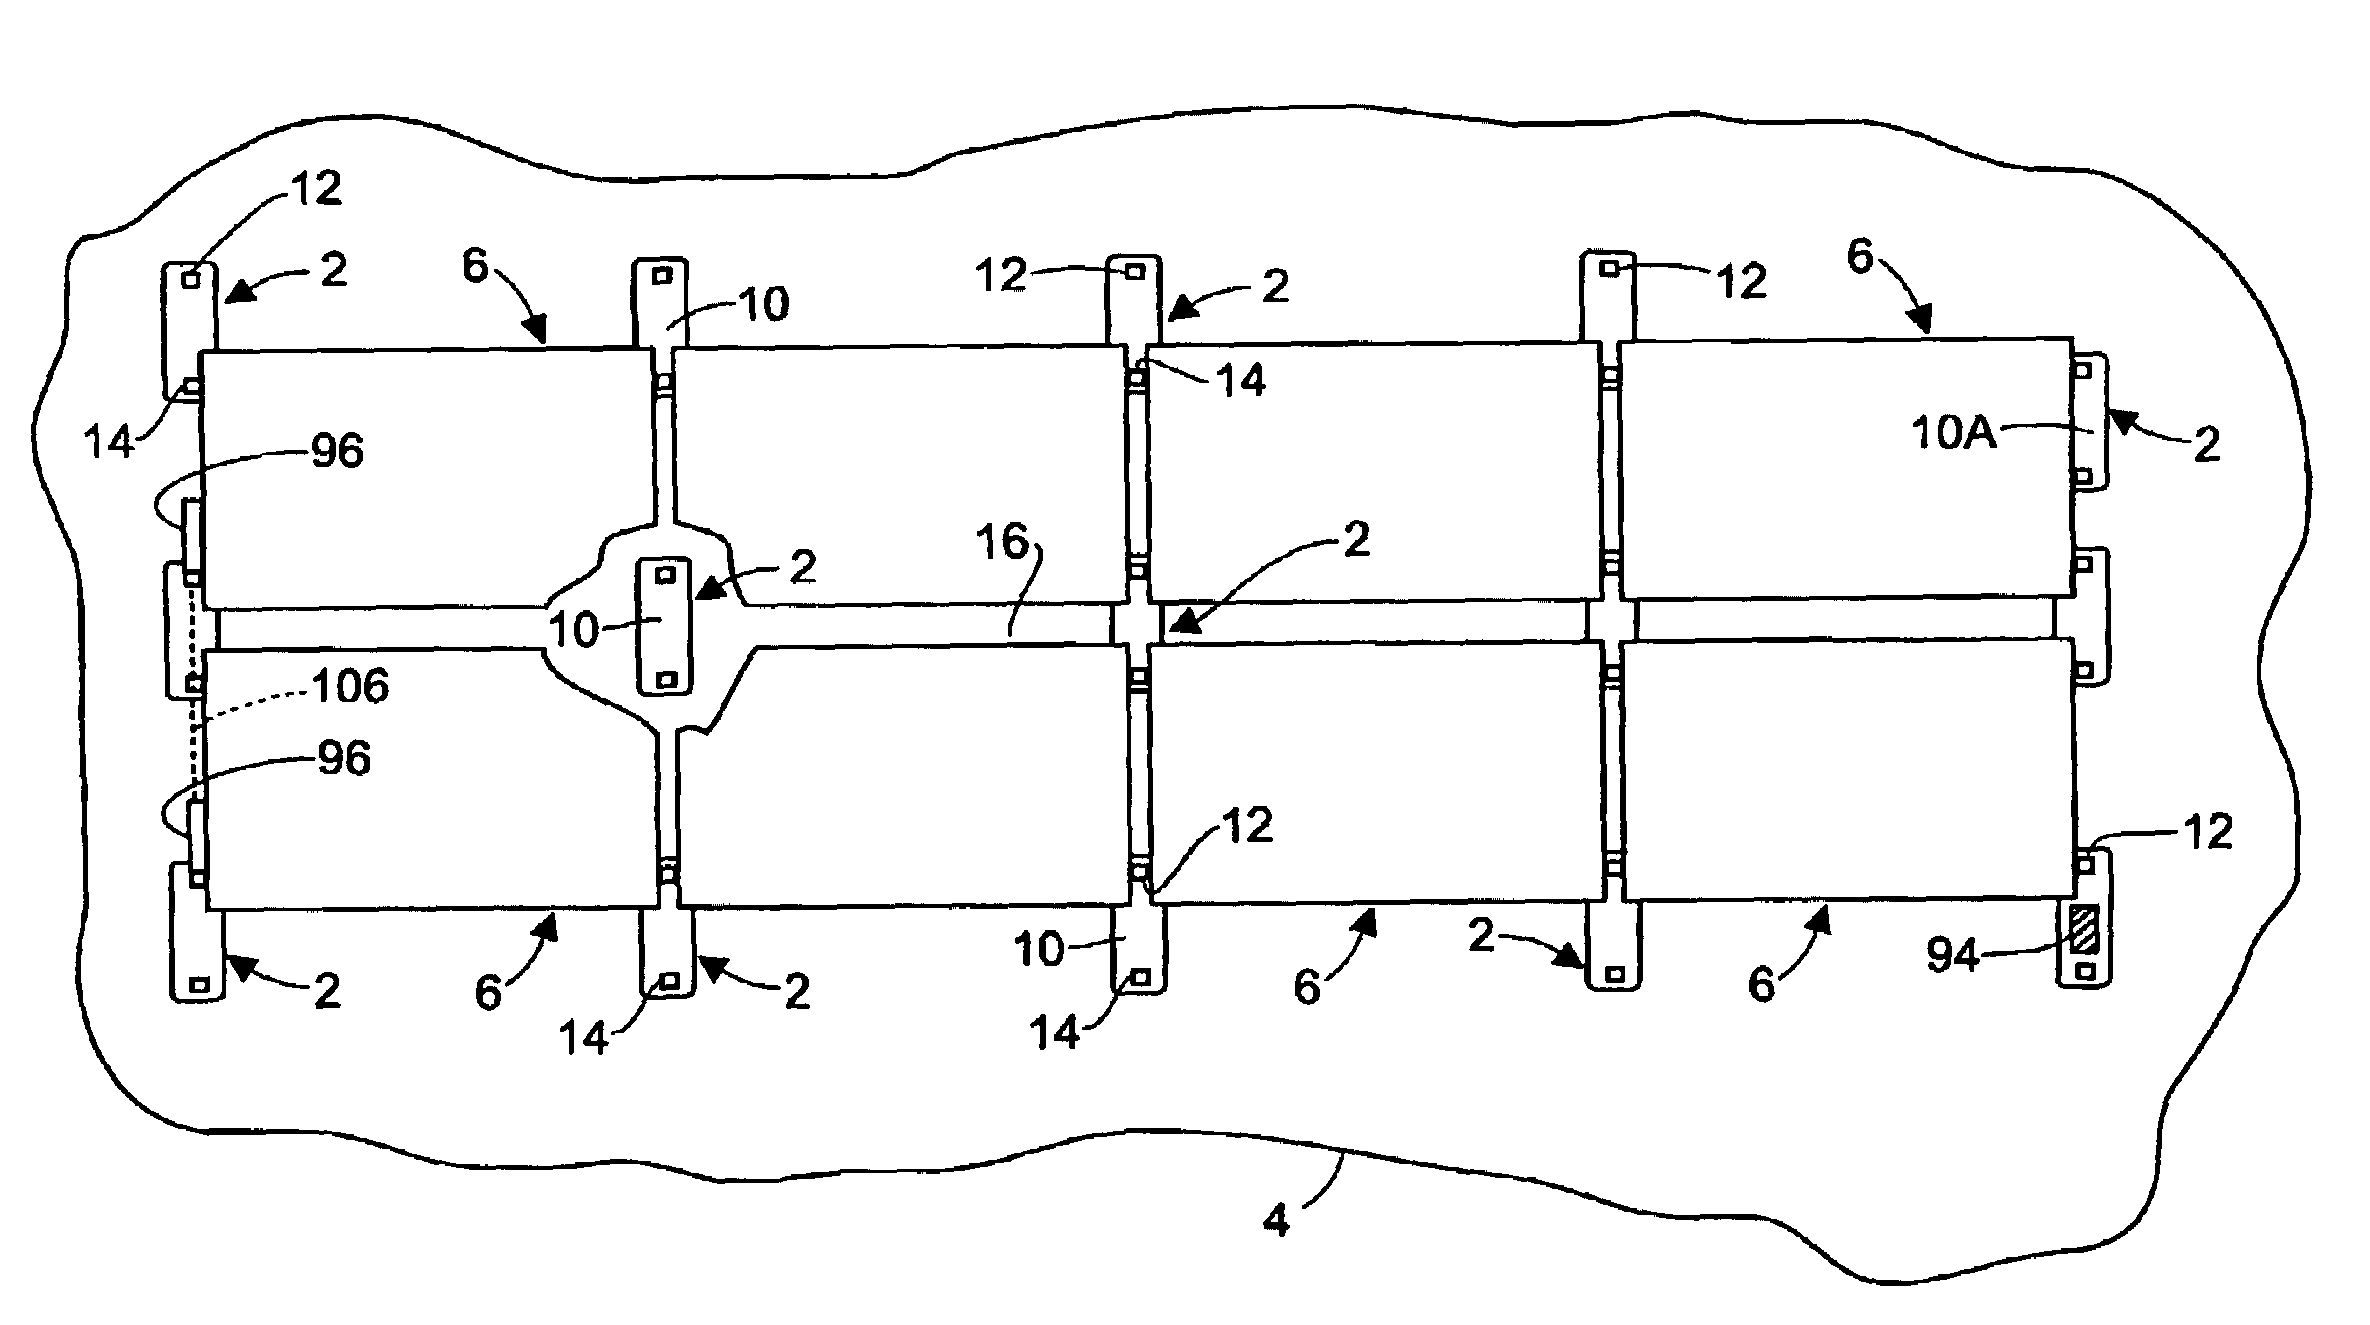 Apparatus and method for mounting photovoltaic power generating systems on buildings